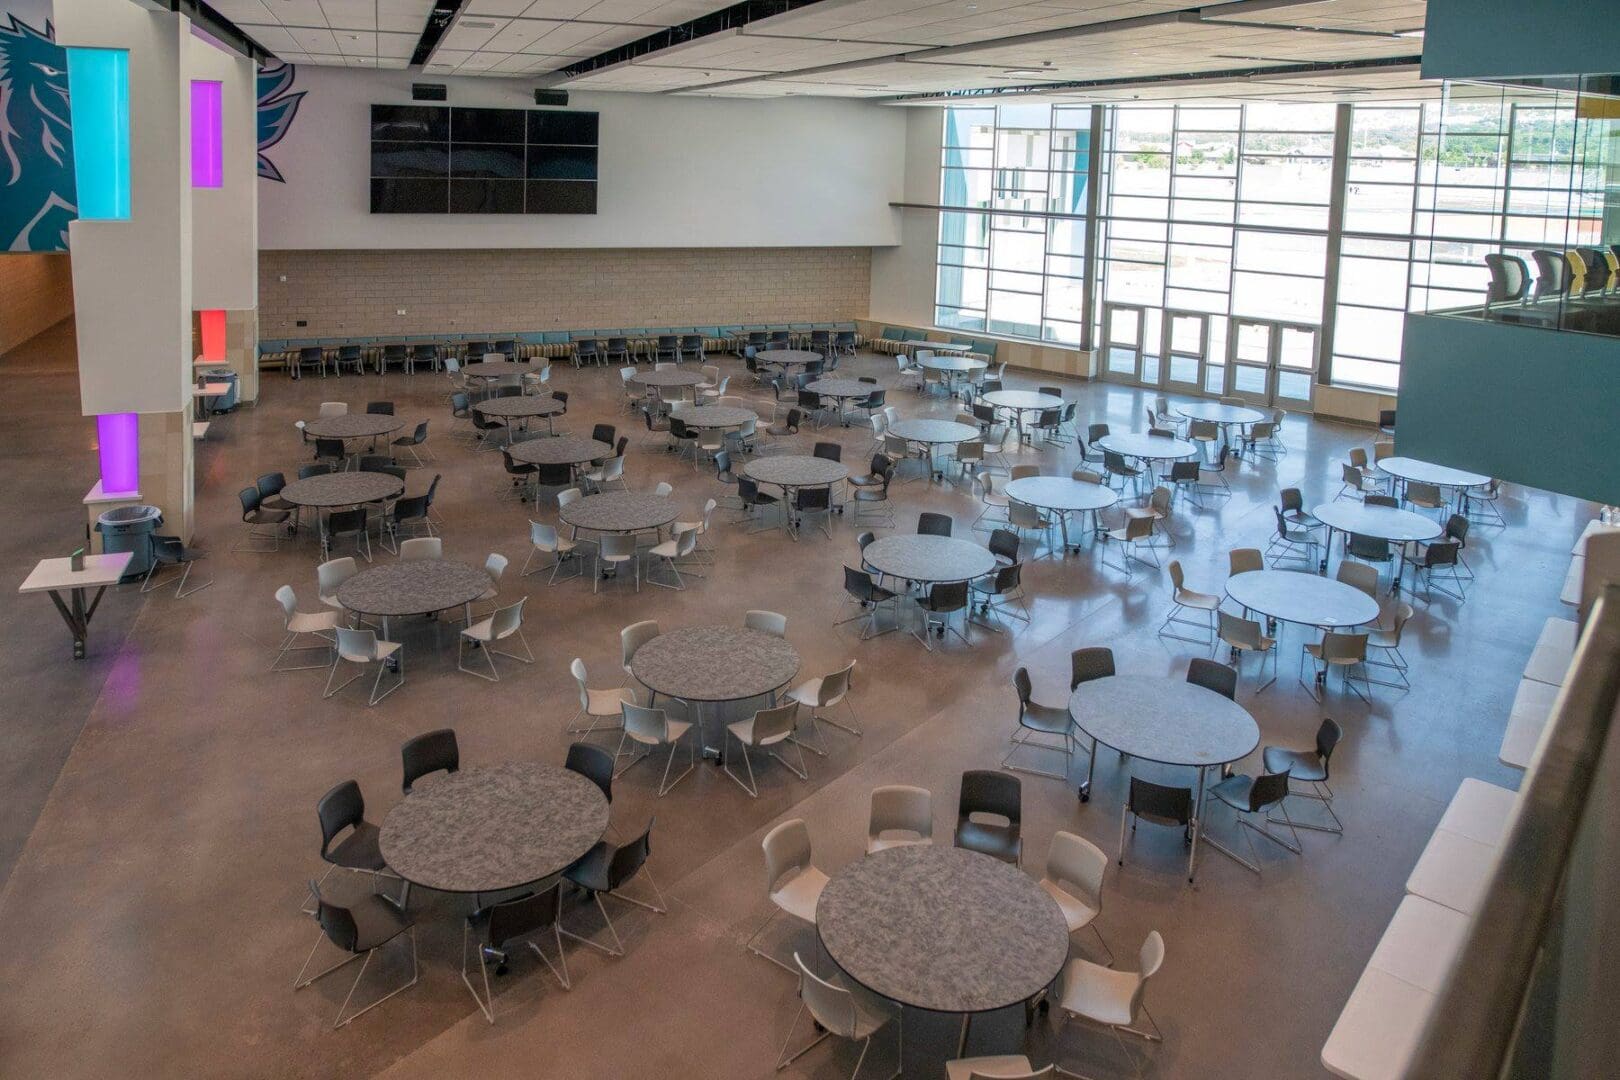 A large room with many tables and chairs.